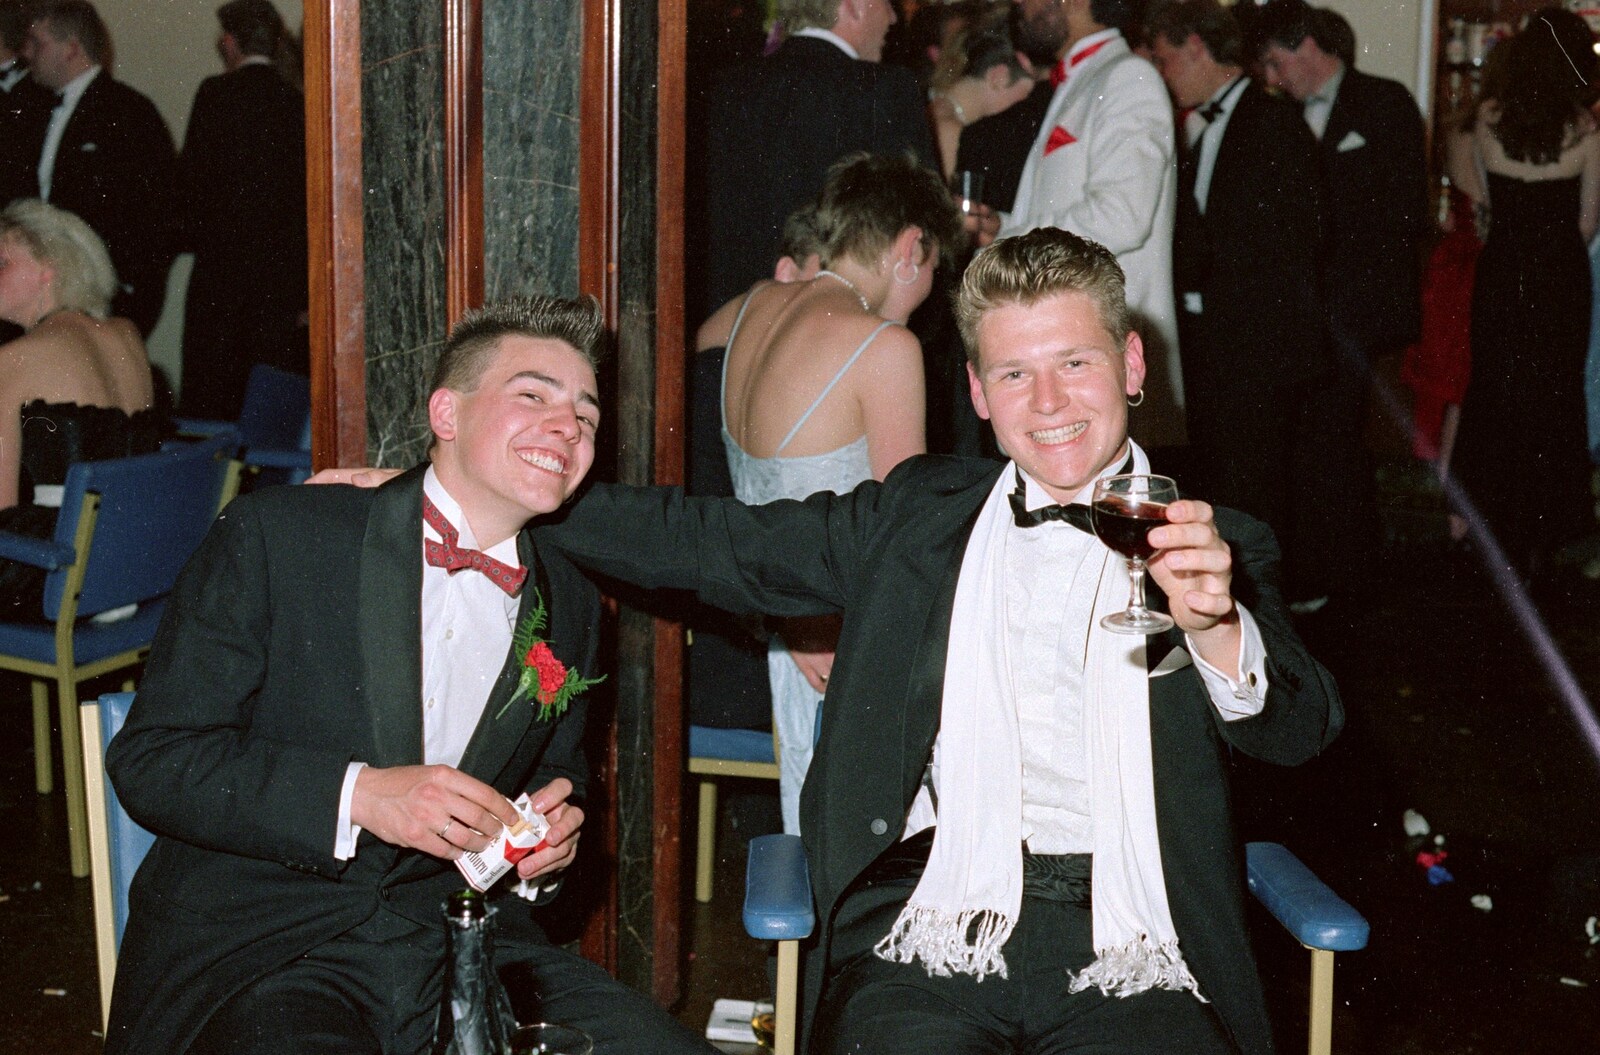 Marlboro and red wine from Uni: PPSU May Ball, The Guildhall, Plymouth - 4th May 1987